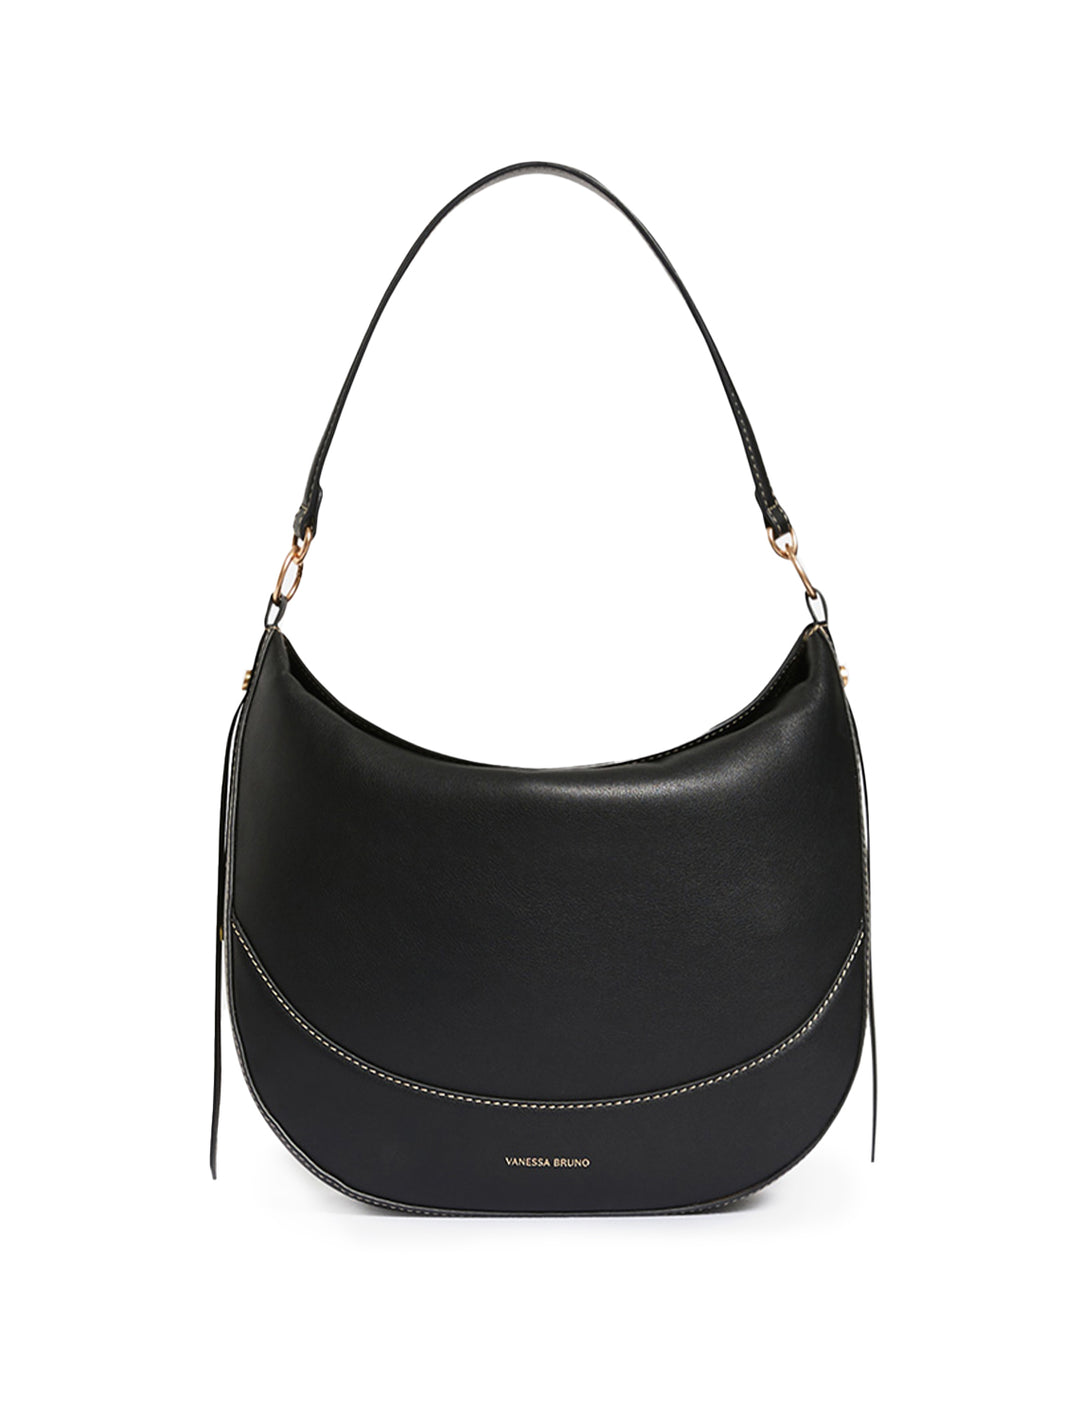 Front view of Vanessa Bruno's daily bag in noir.